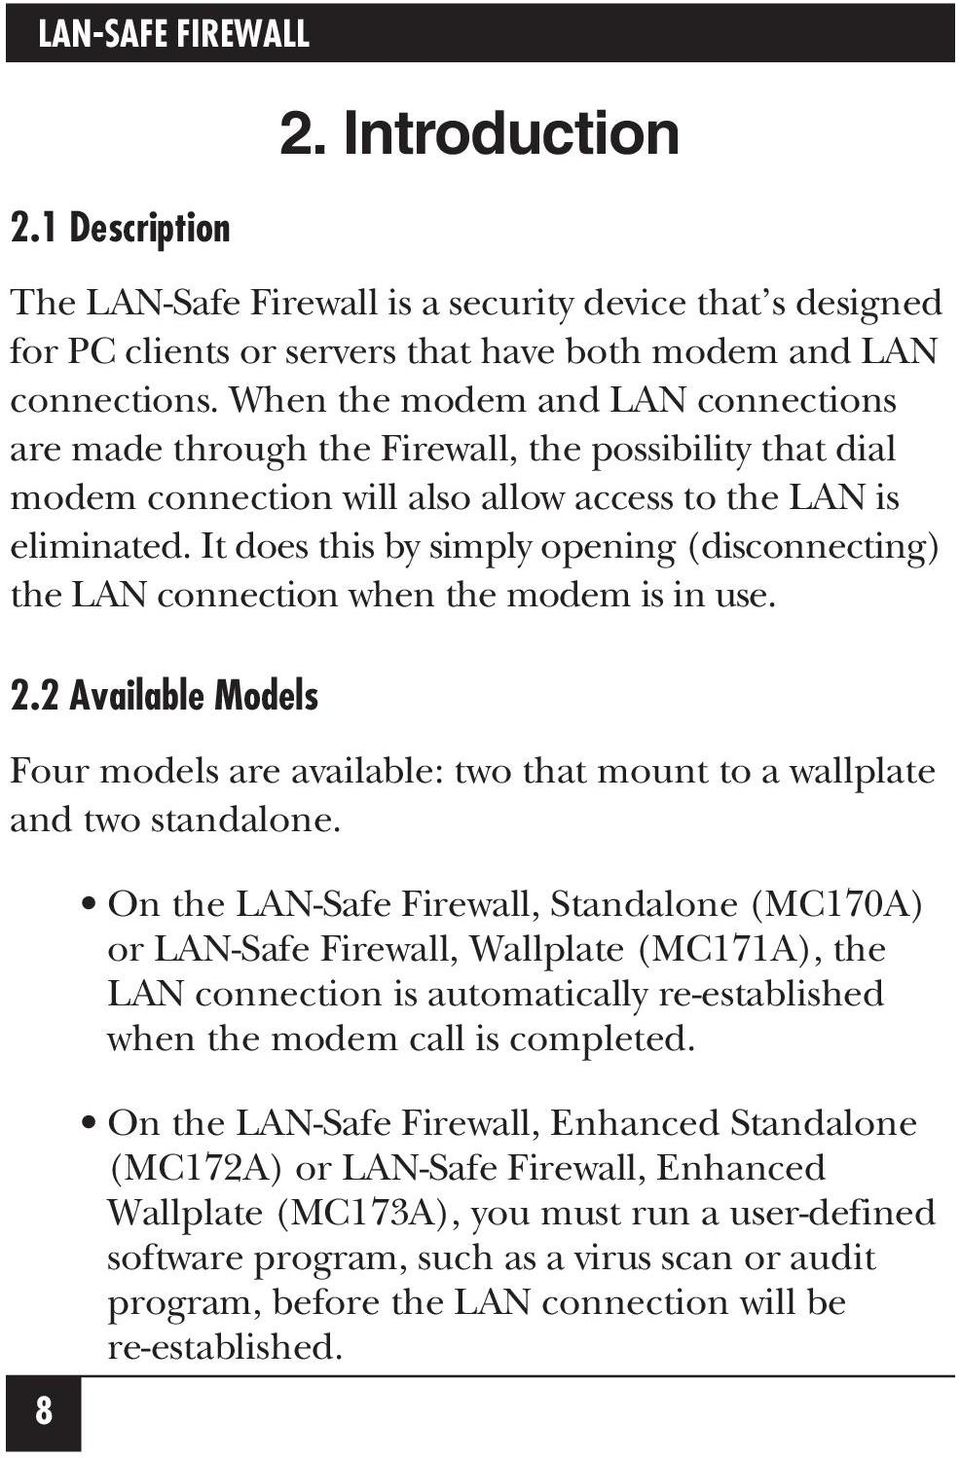 It does this by simply opening (disconnecting) the LAN connection when the modem is in use. 2.2 Available Models Four models are available: two that mount to a wallplate and two standalone.